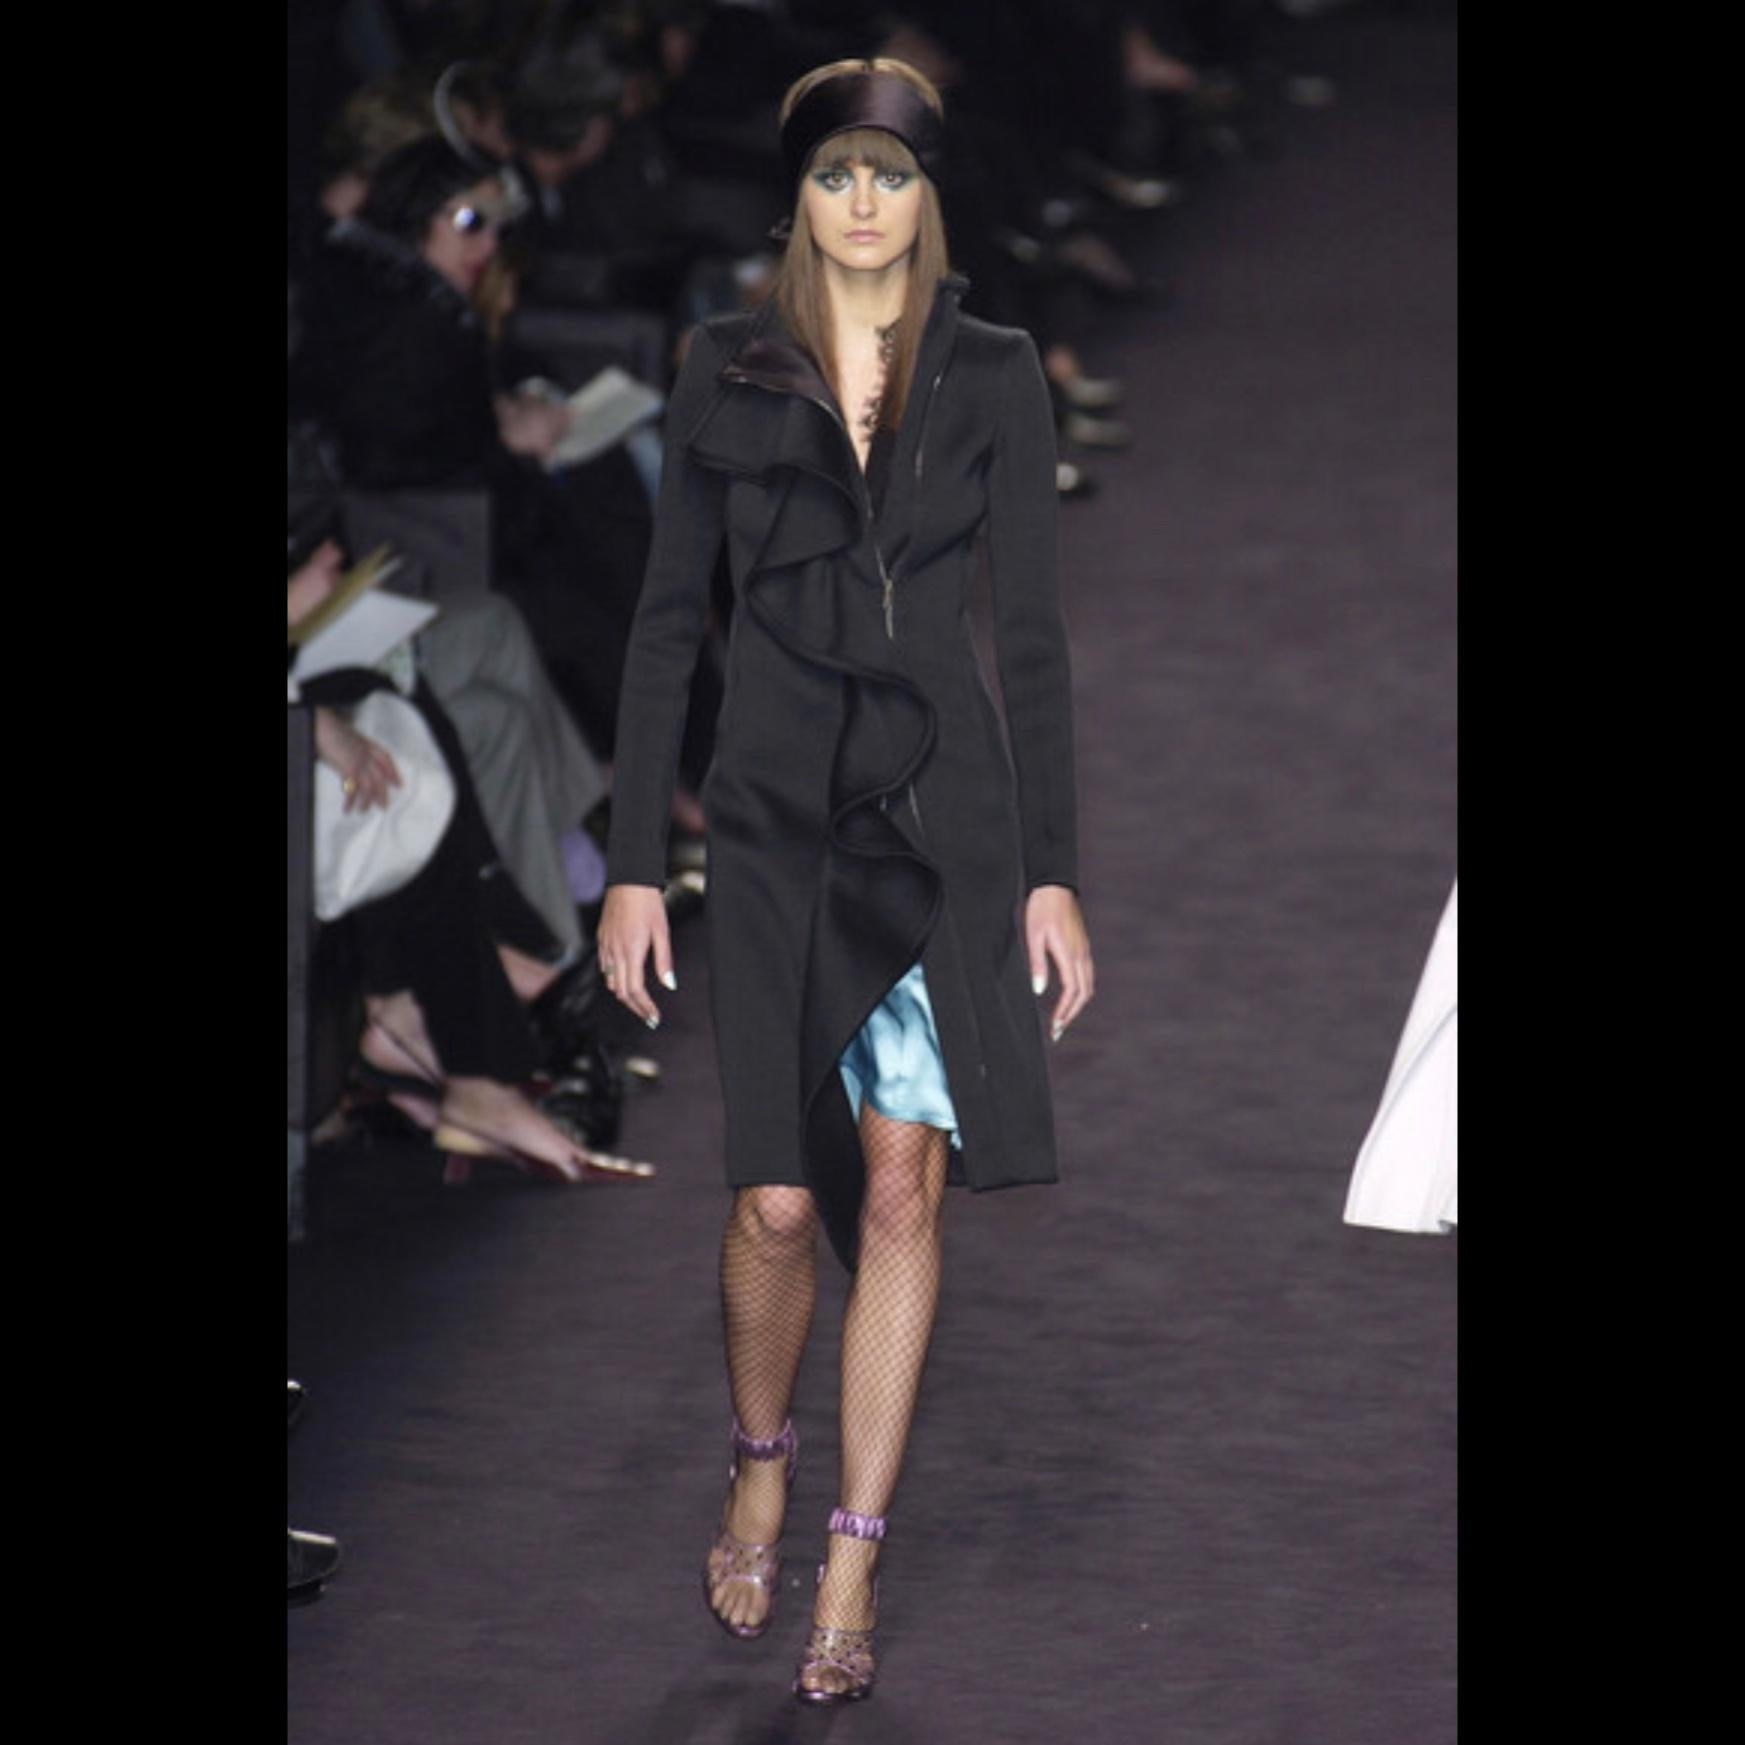 Presenting an elevated black Yves Saint Laurent Rive Gauche ruffle jacket, designed by Tom Ford. From the Fall/Winter 2003 collection, this jacket debuted on the season's runway as look 12. This coat features an abundance of fabric, covering the